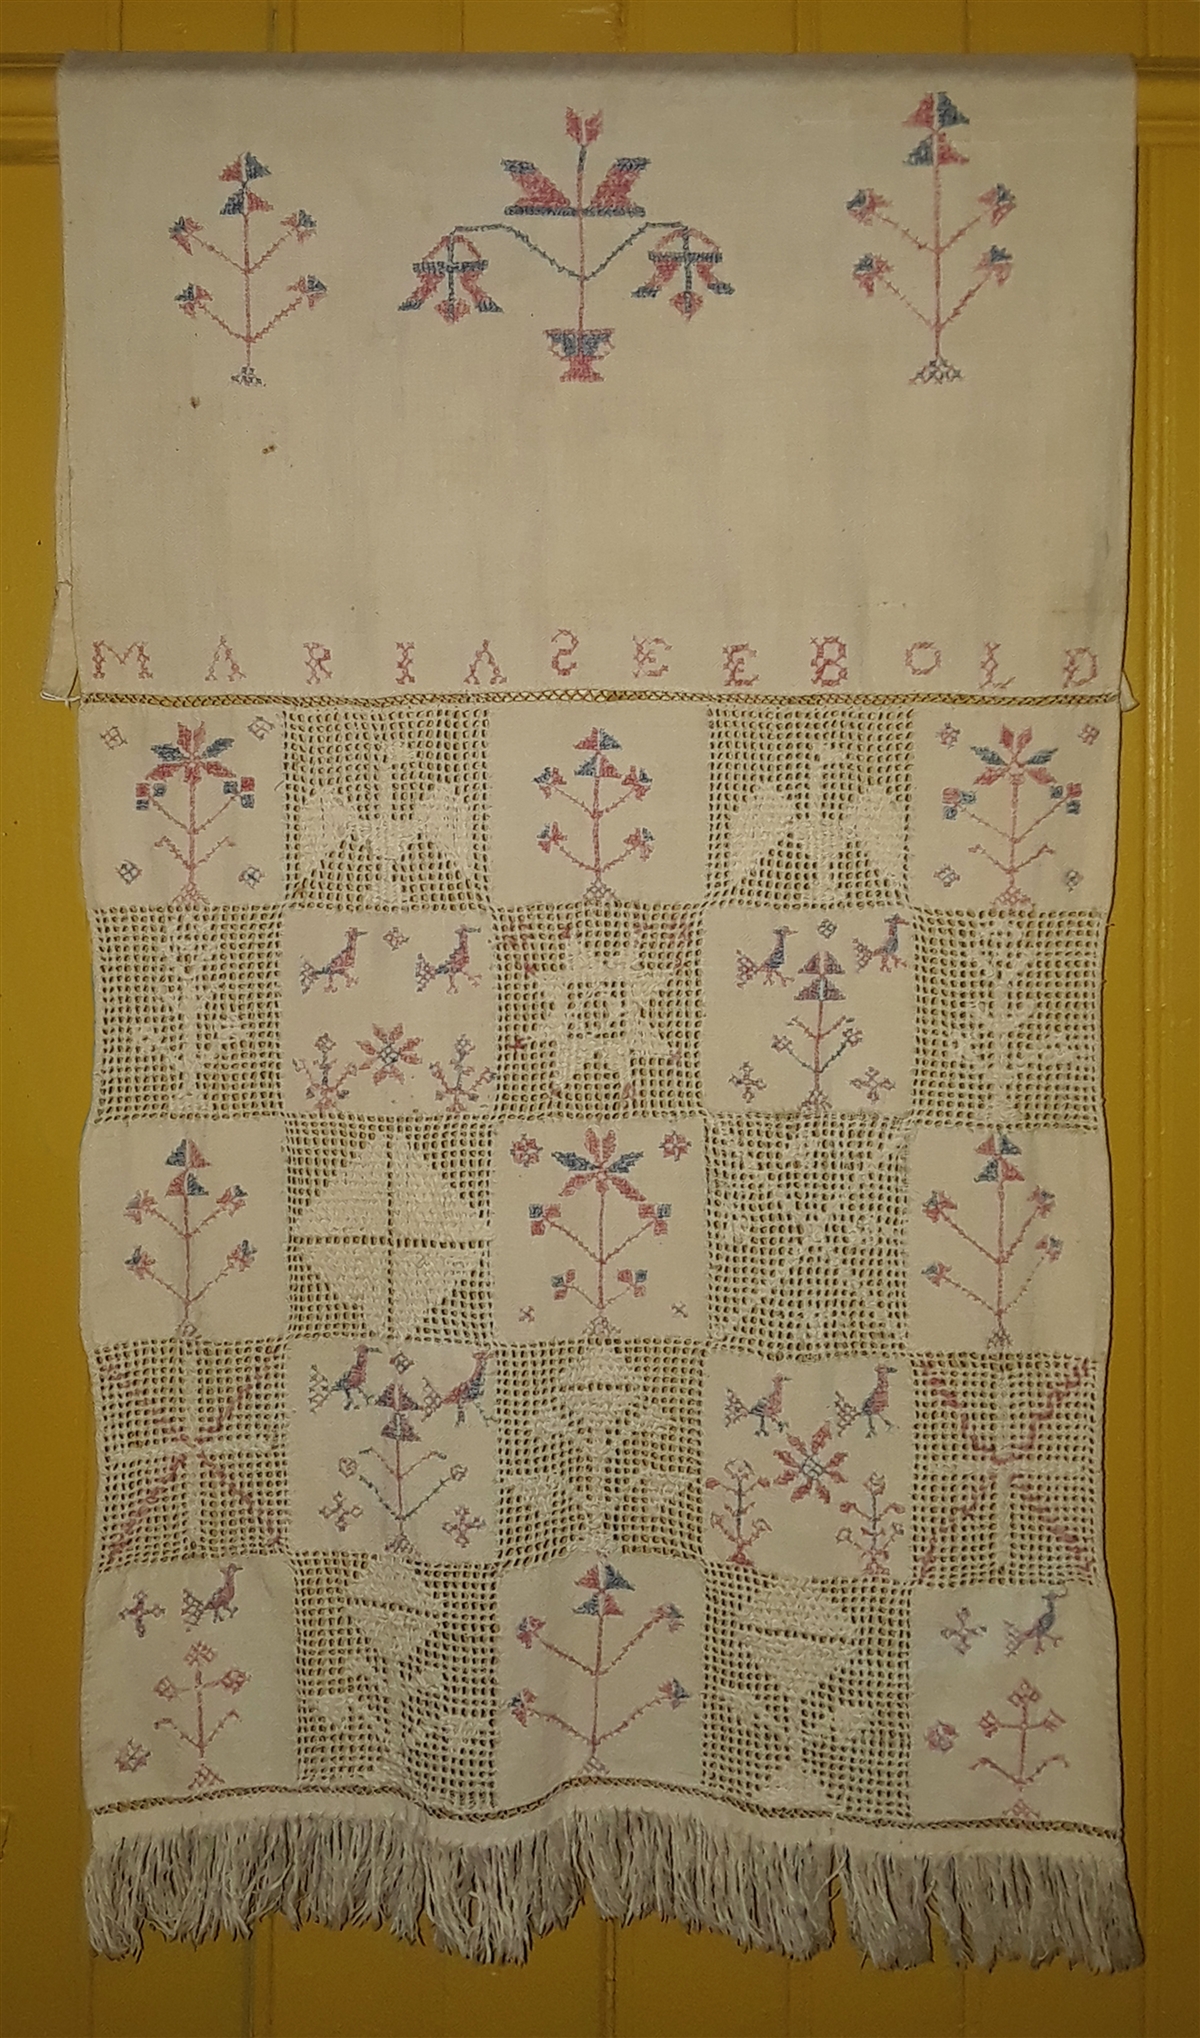 A white tea towel with pink and blue thread decorative stitching. The top portion is a solid white with a center motif of flowers in vases, with secondary floral arrangements on each side. The name Maria Seebold is stitched below. The lower portion has 12 solid fabric squares with floral arrangements stitched in pink and blue thread. 12 additional lace squares include a star, a diamond, birds, flowers, and crosses. There is a fringe at the very bottom of the tea towel.